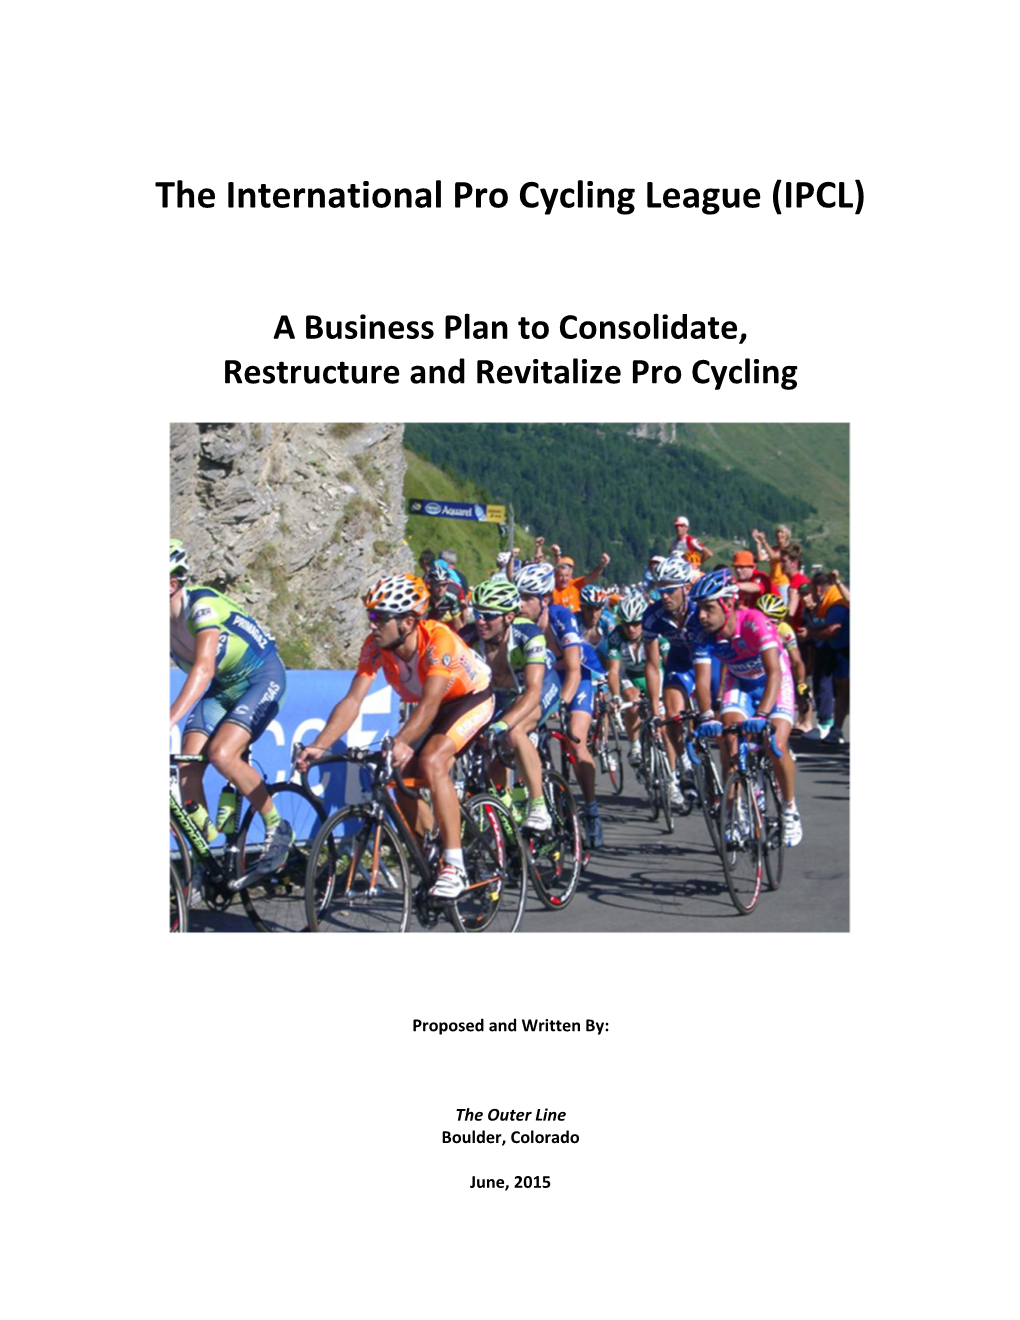 Business Plan to Consolidate, Restructure and Revitalize Pro Cycling